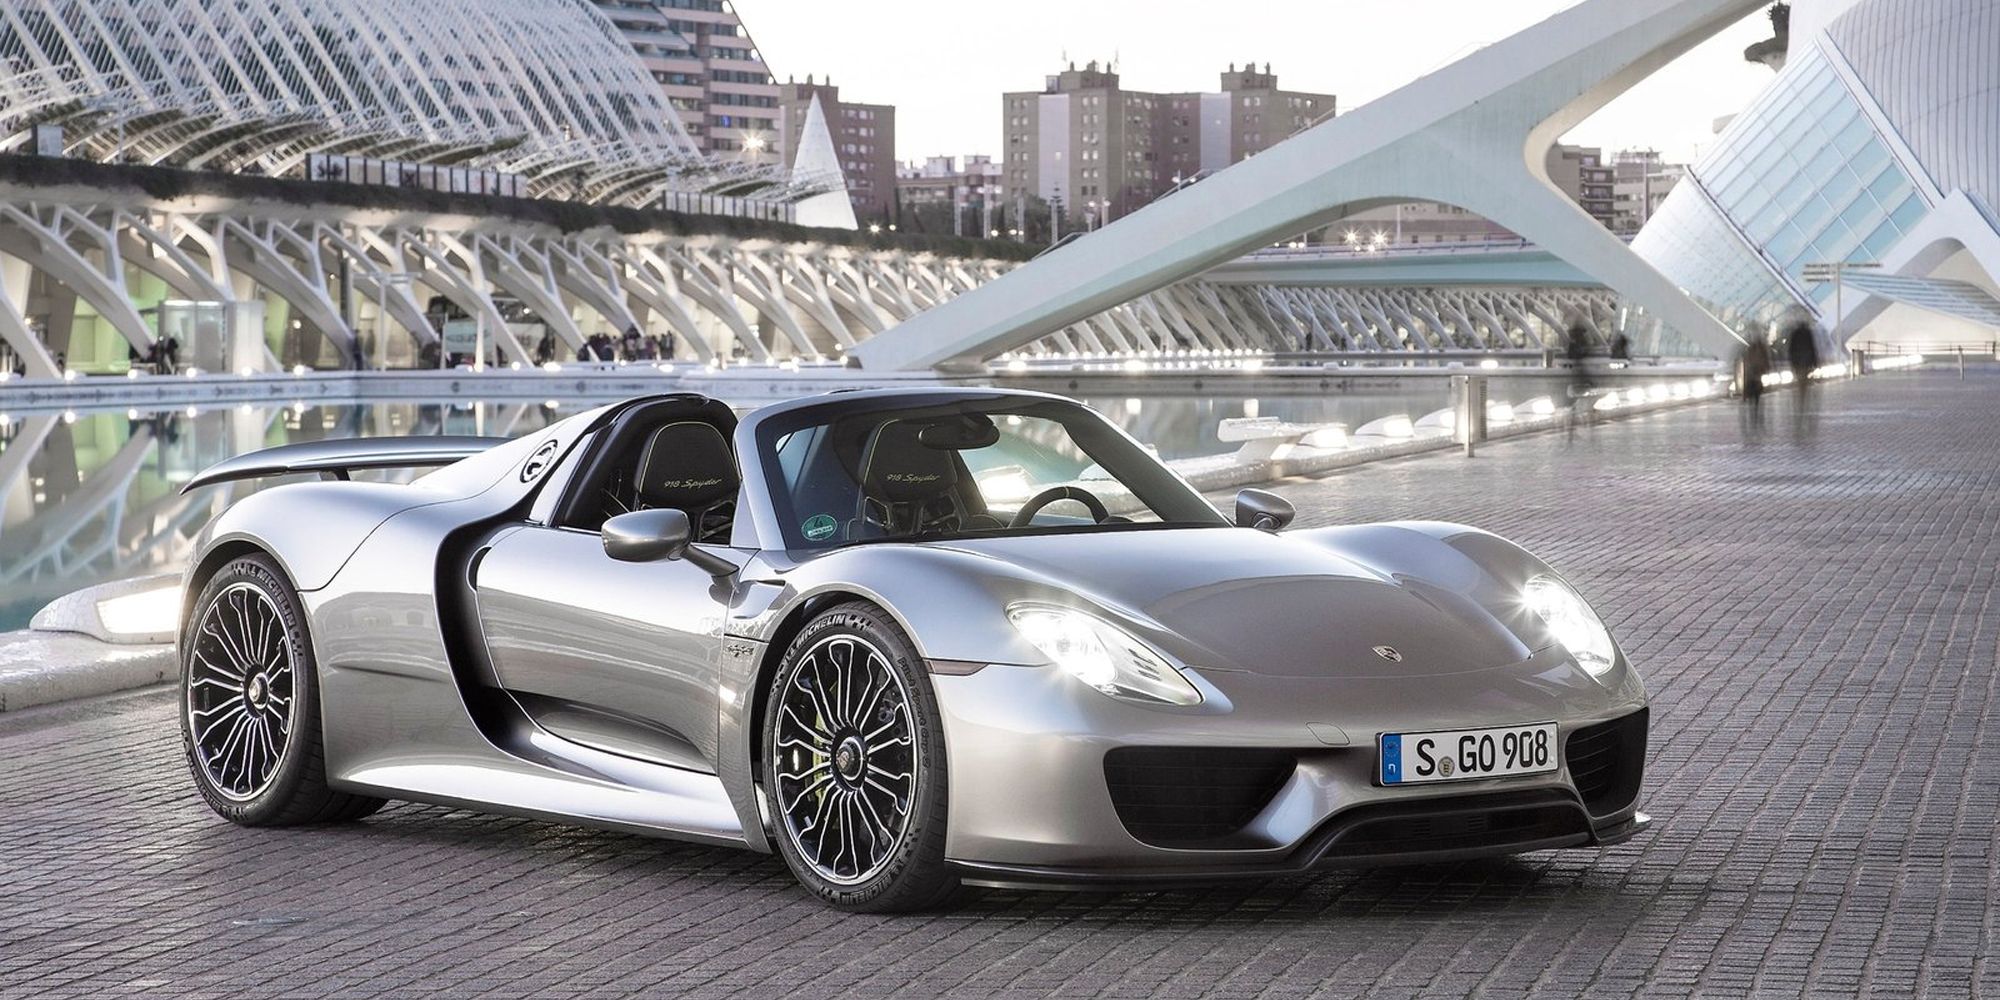 Front 3/4 view of a silver 918 Spyder